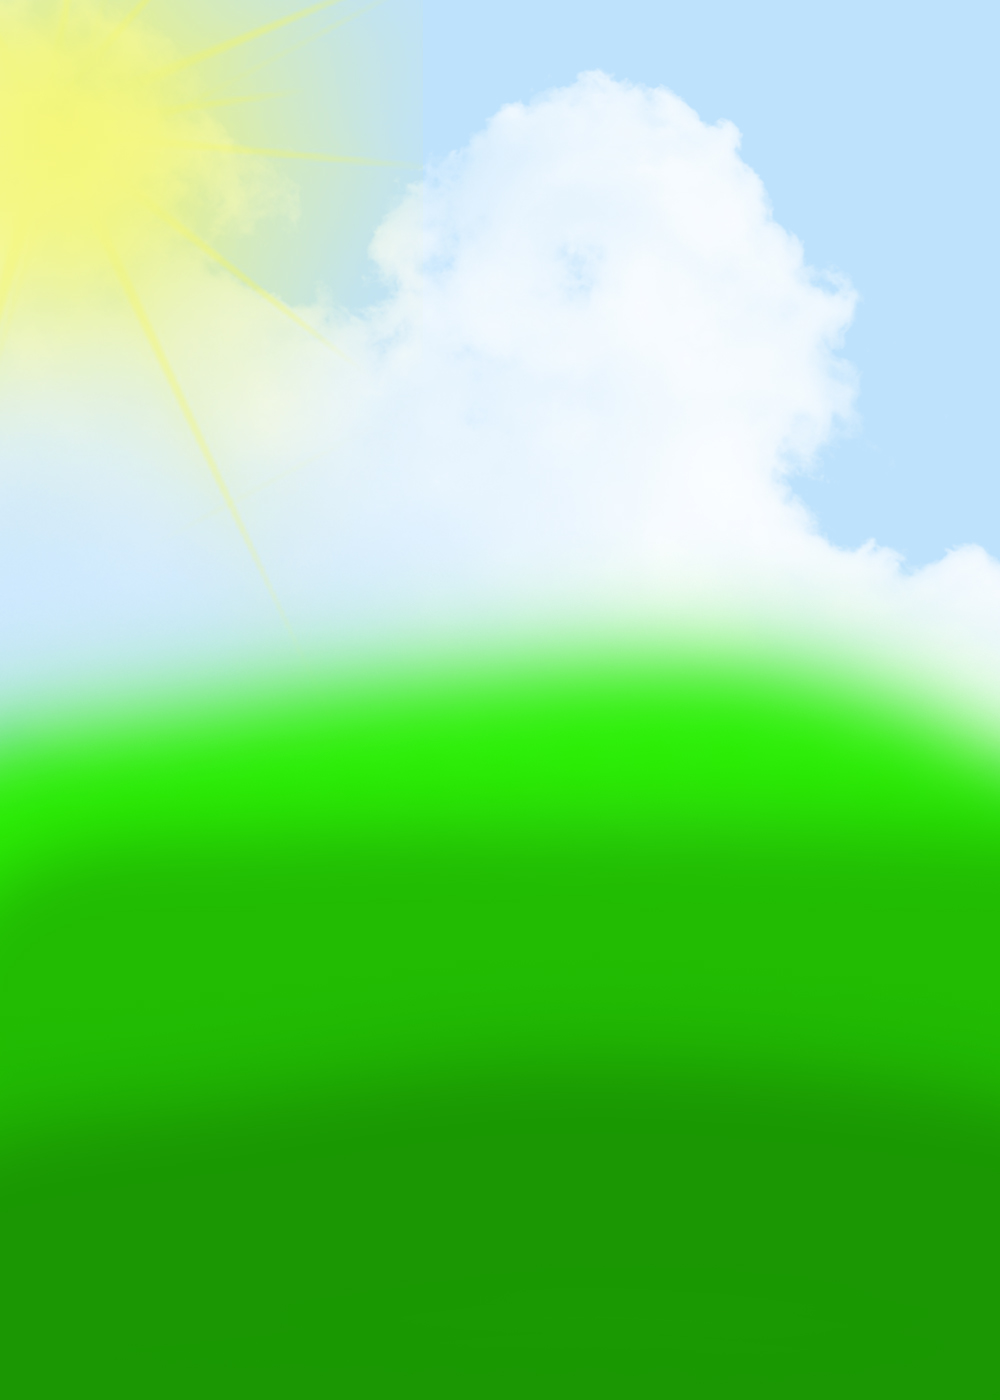 FREE-Simple Grass Background